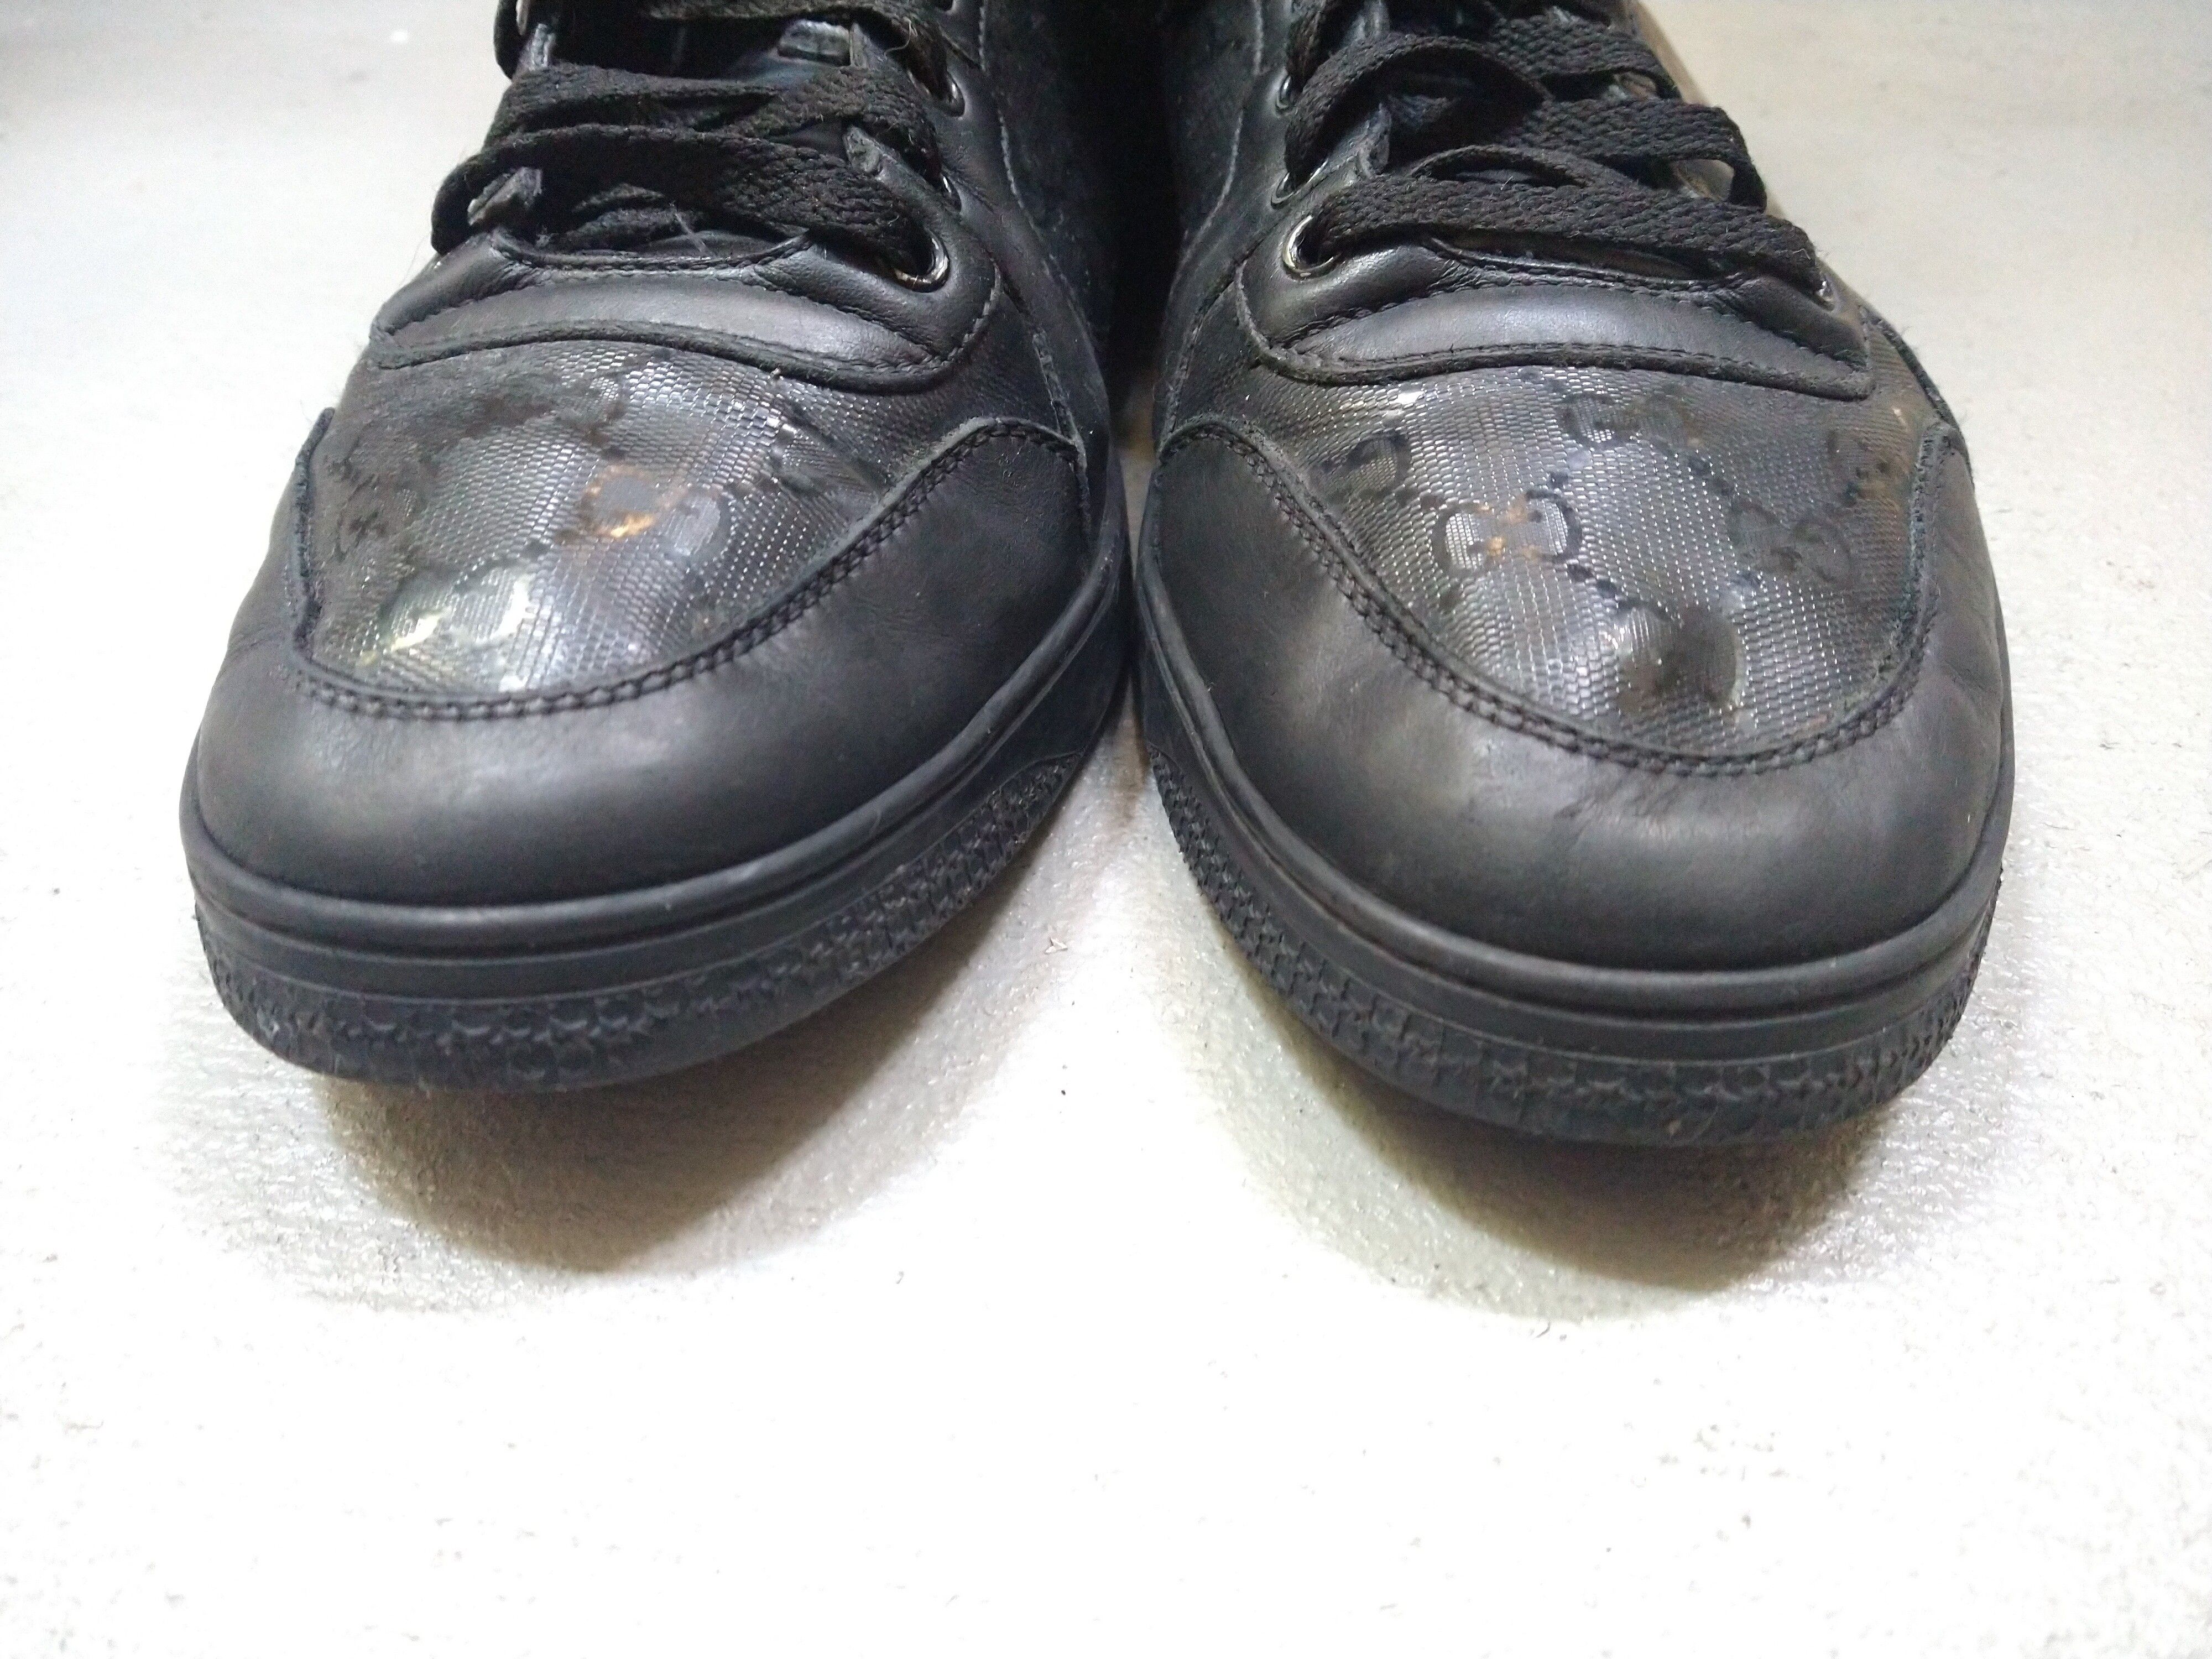 Gucci Gucci High Top Sneakers Black Leather Size 11 Lace Up Size US 11 / EU 44 - 2 Preview